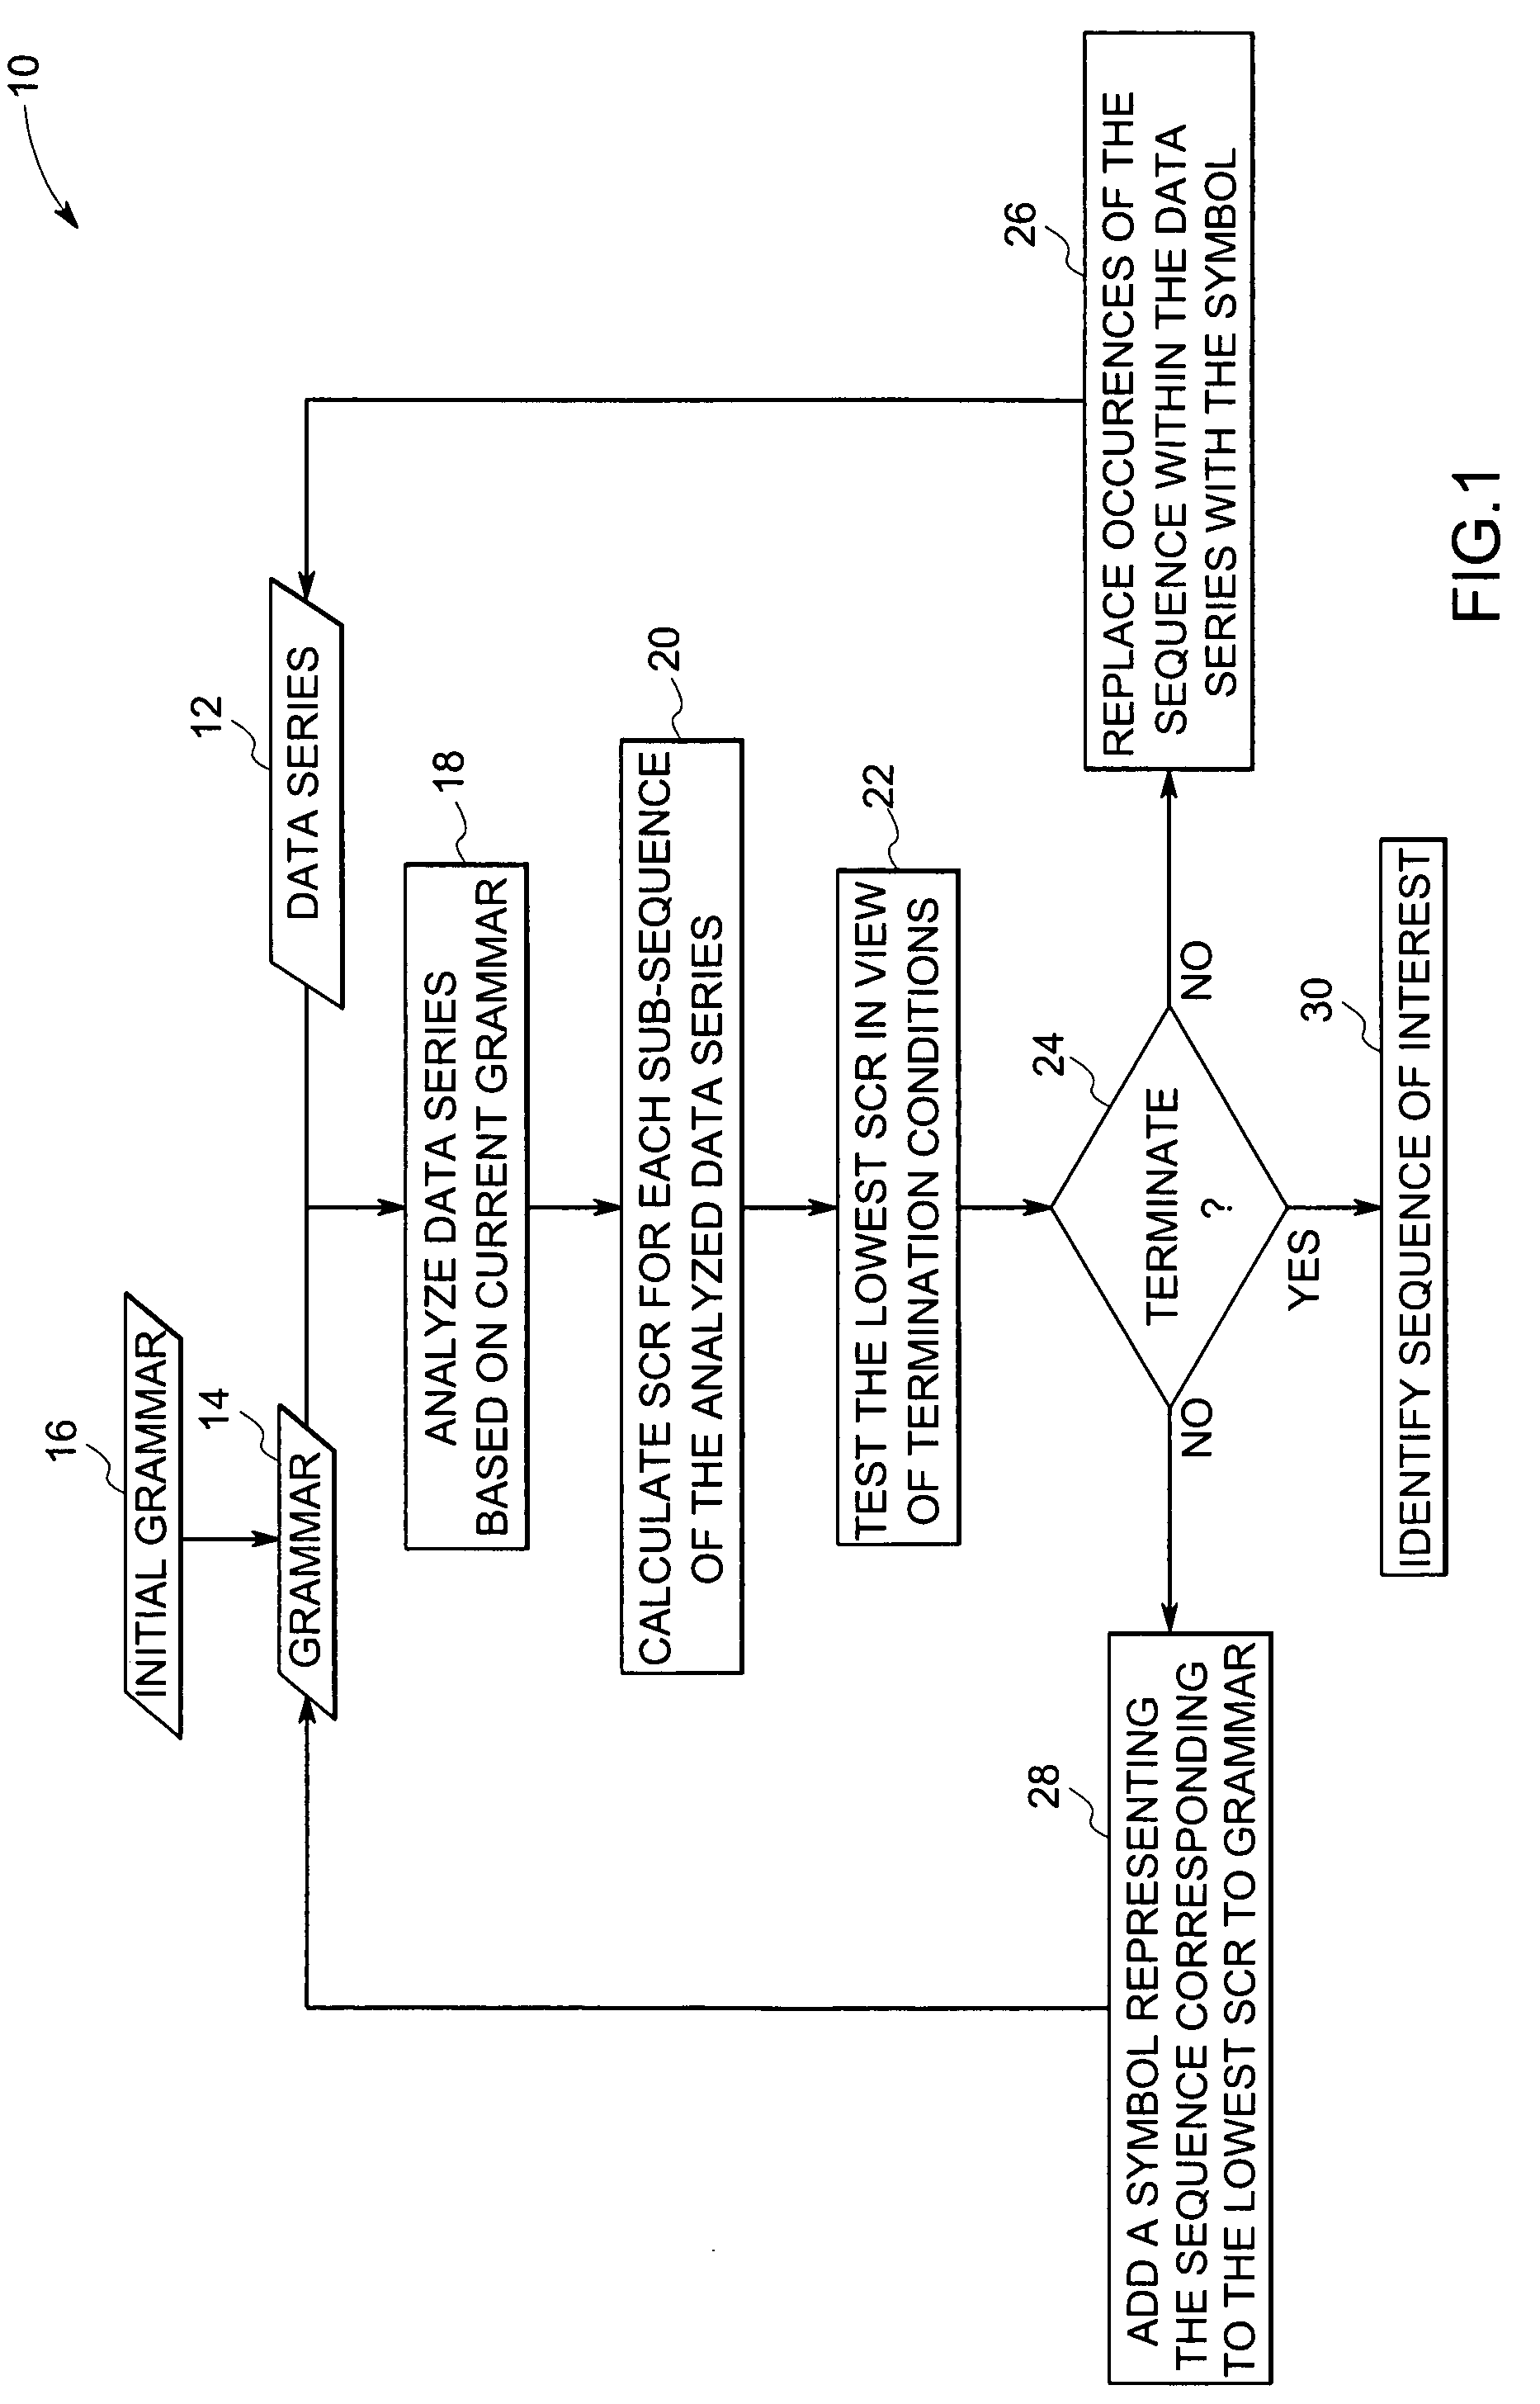 Method for identifying sub-sequences of interest in a sequence